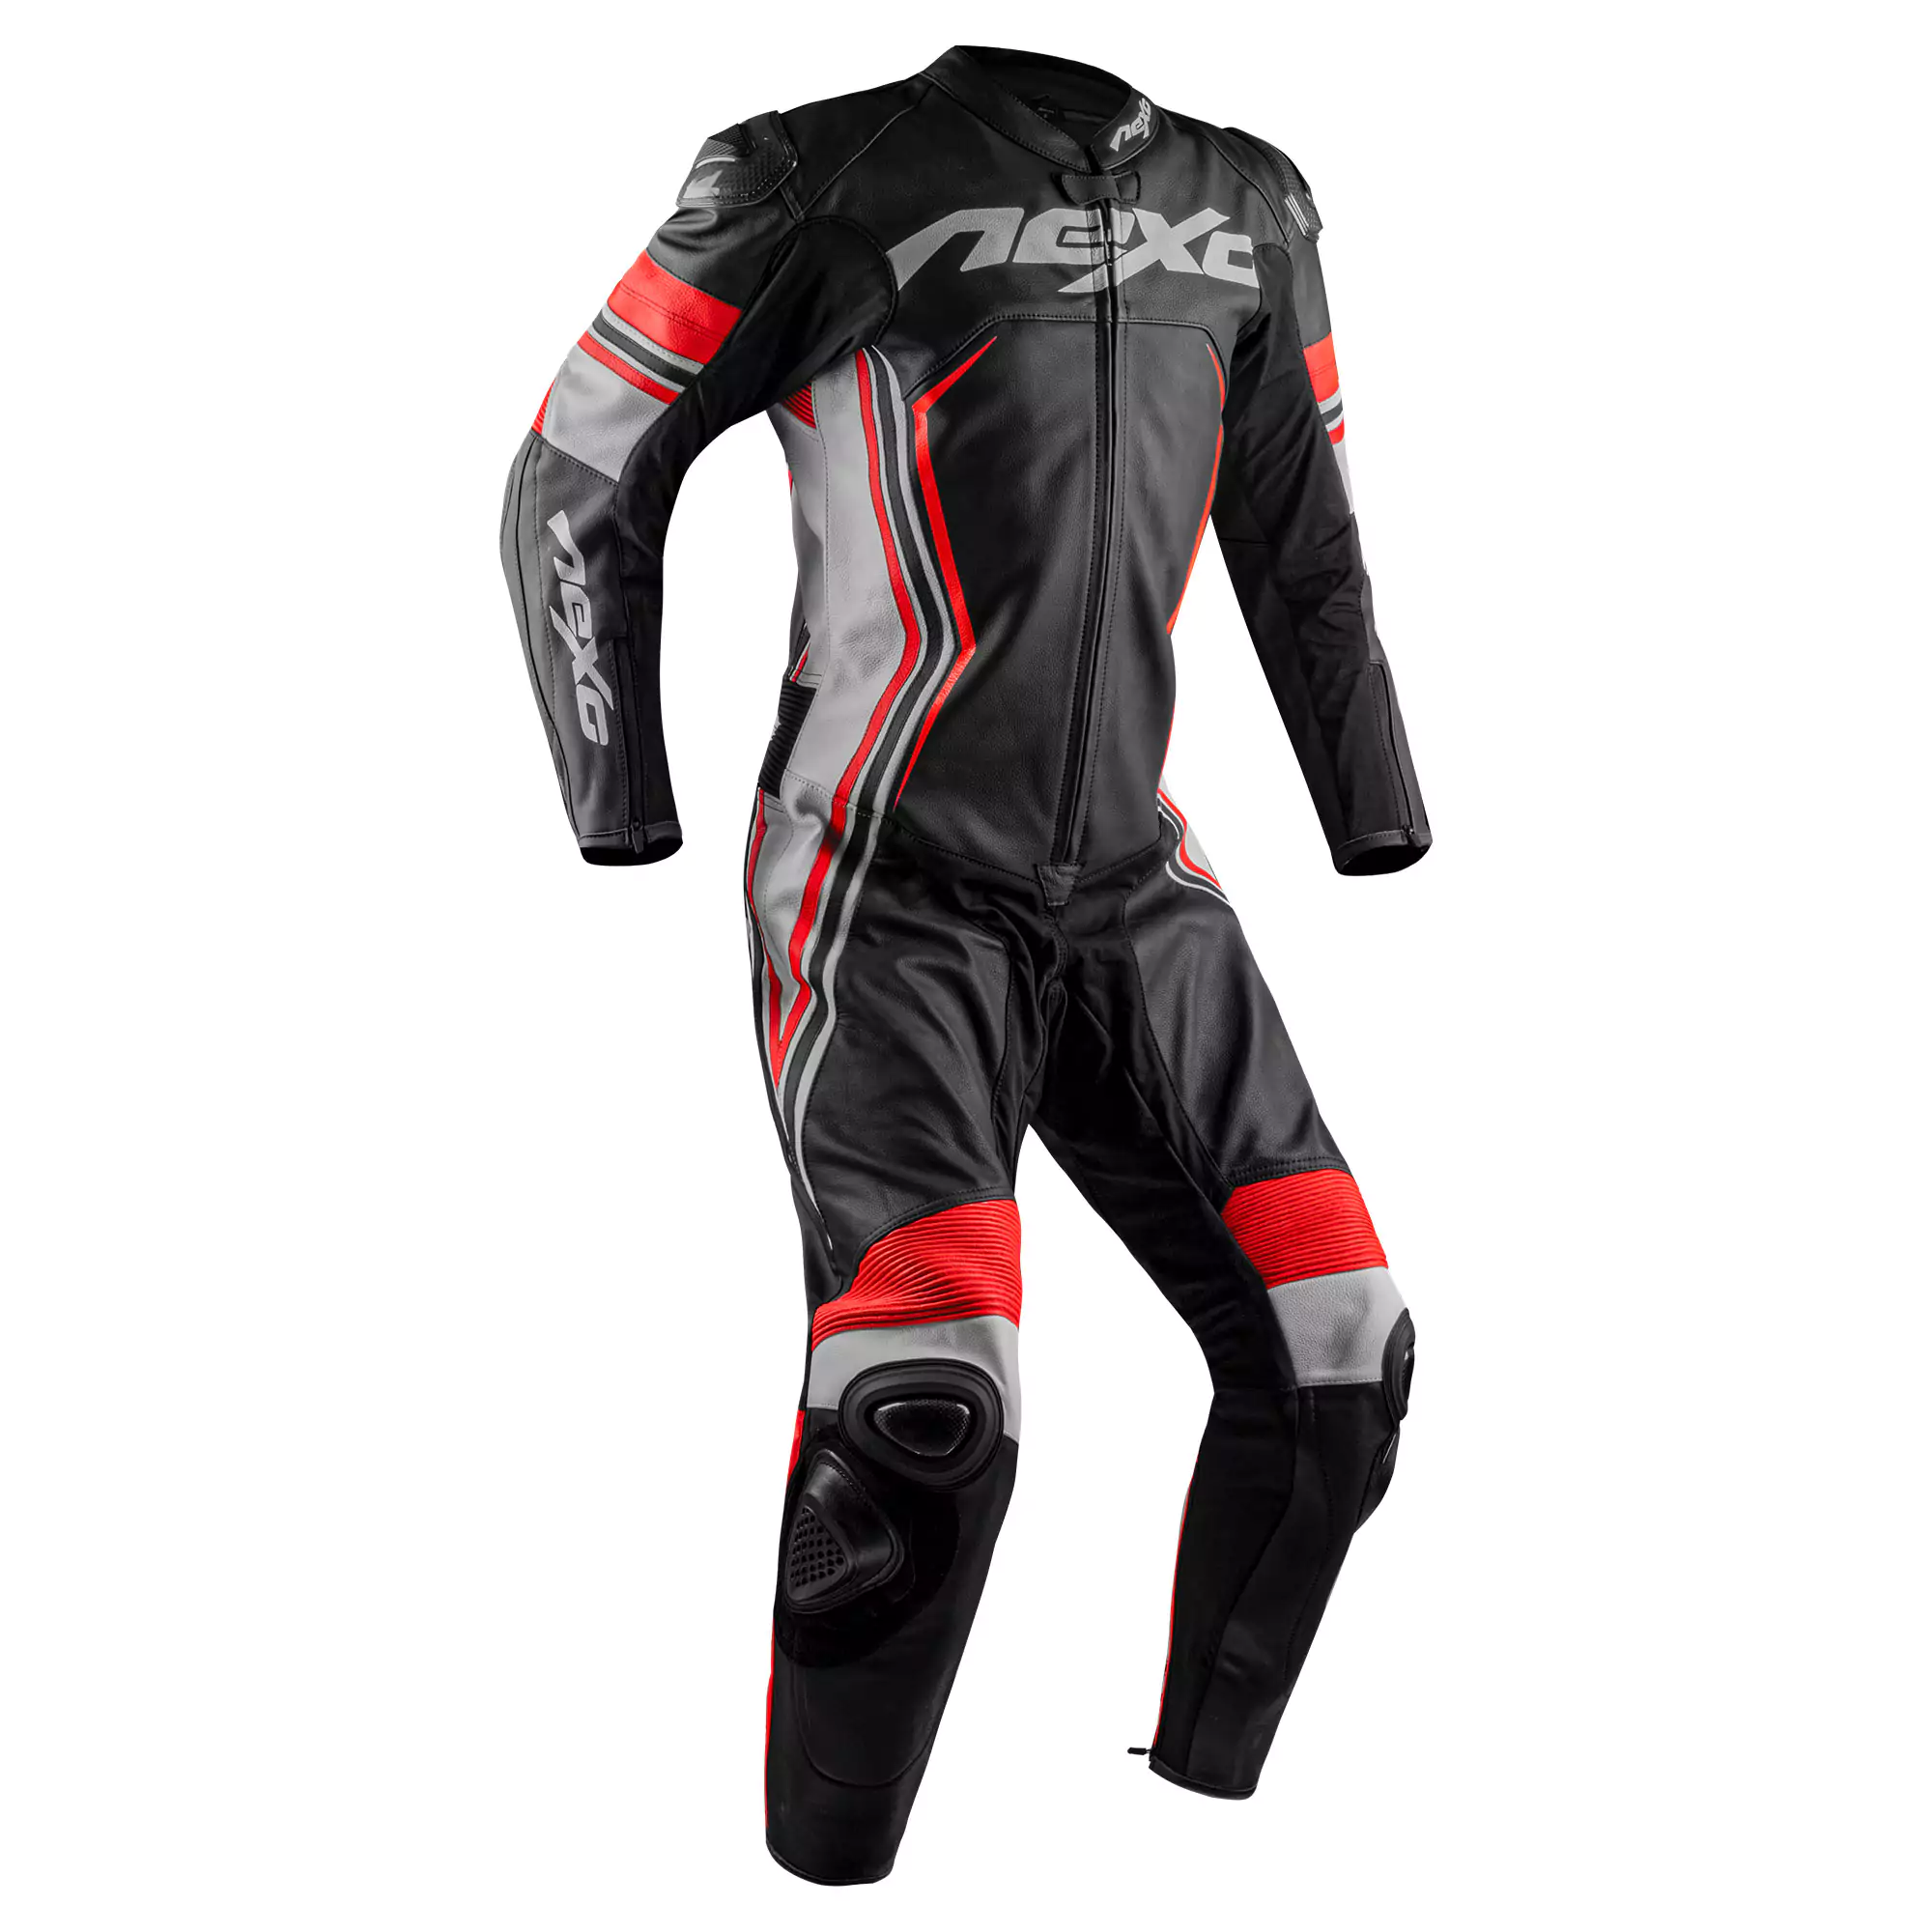 Leather motorcycle full suit with protective armor and racing design.